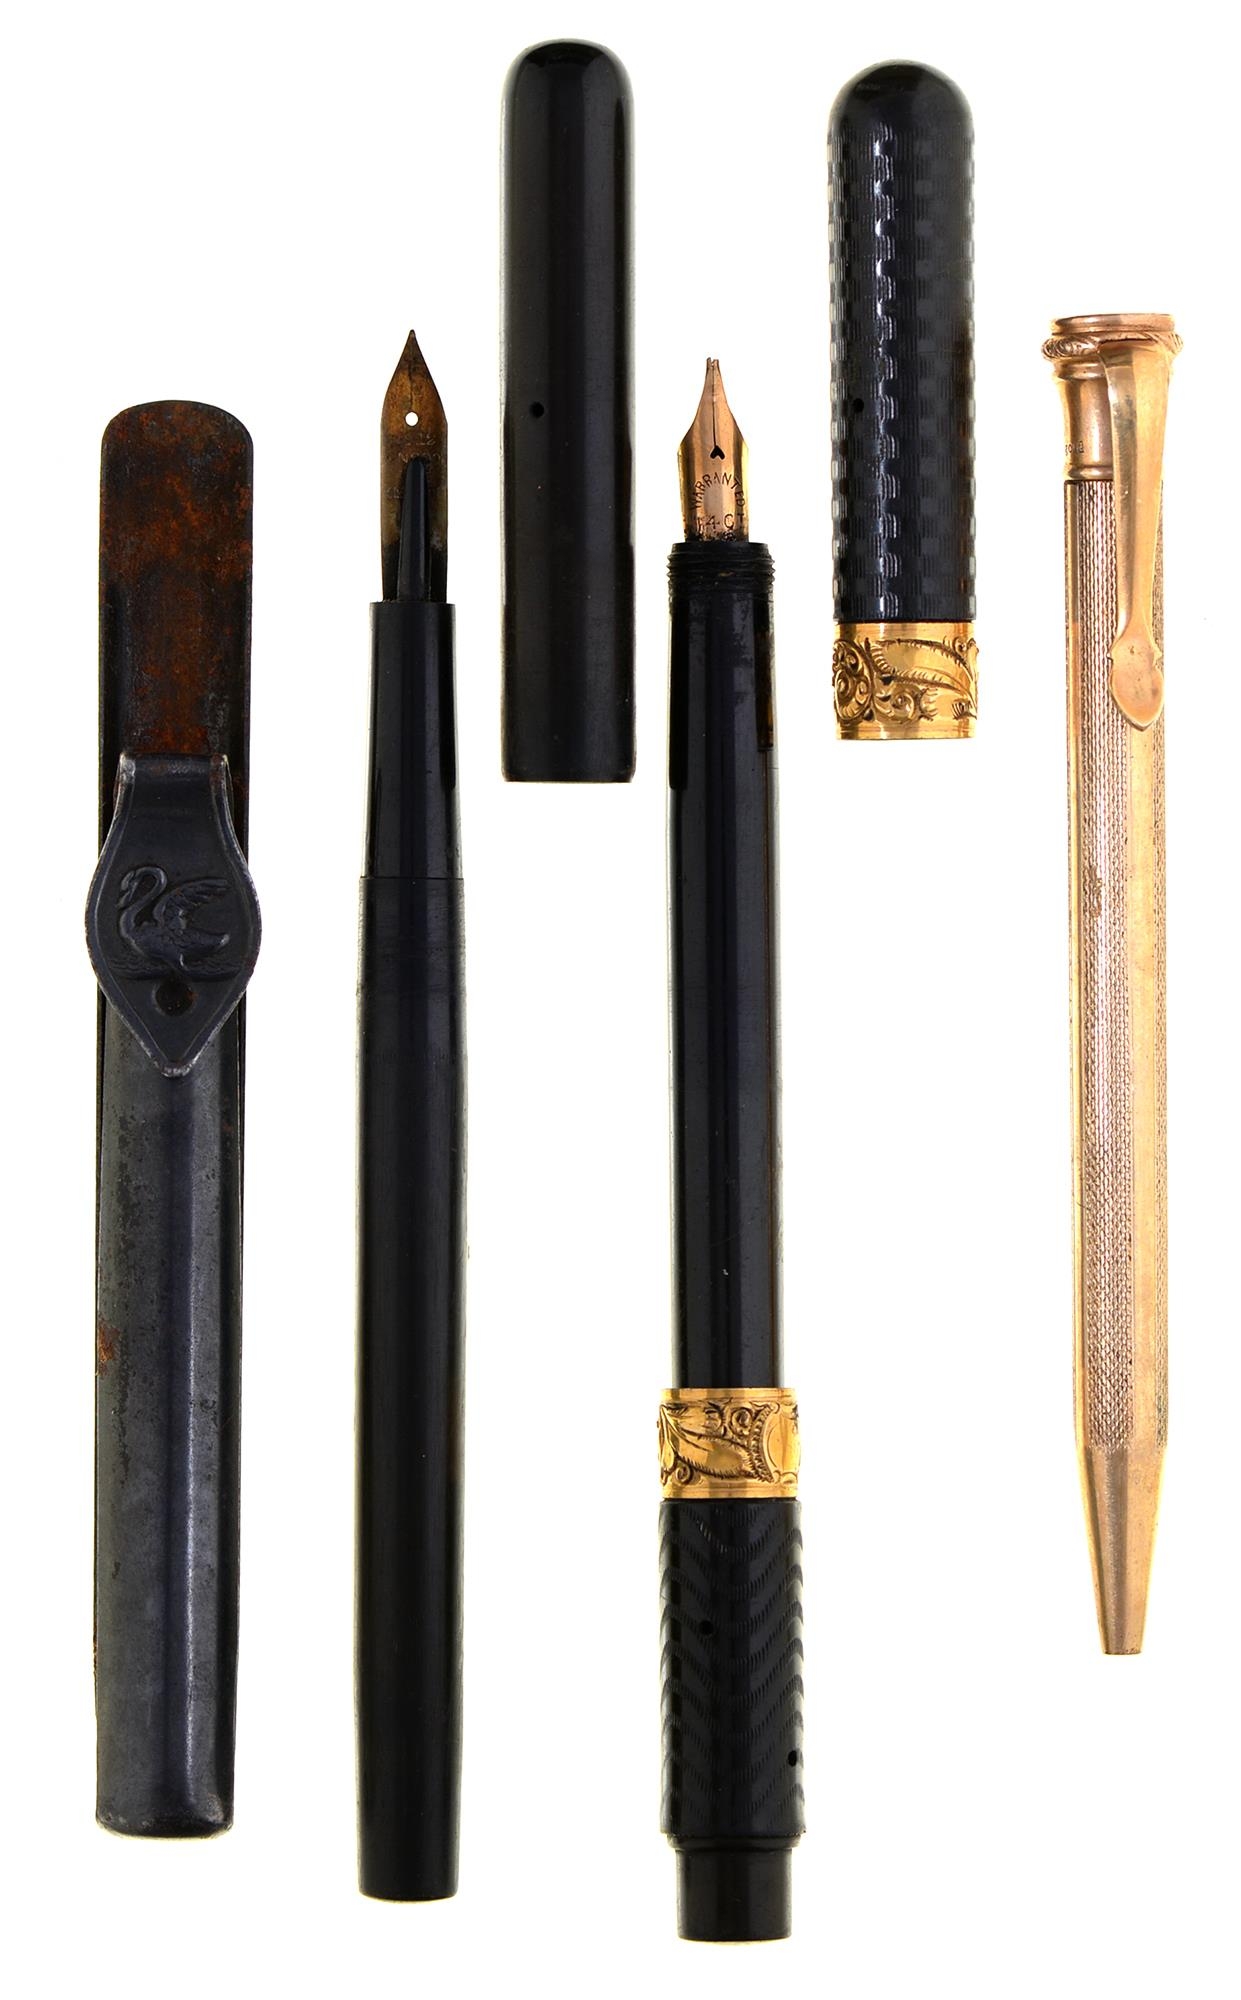 A Moore's non leakable vulcanite fountain pen, engine turned, with two embossed gold collars